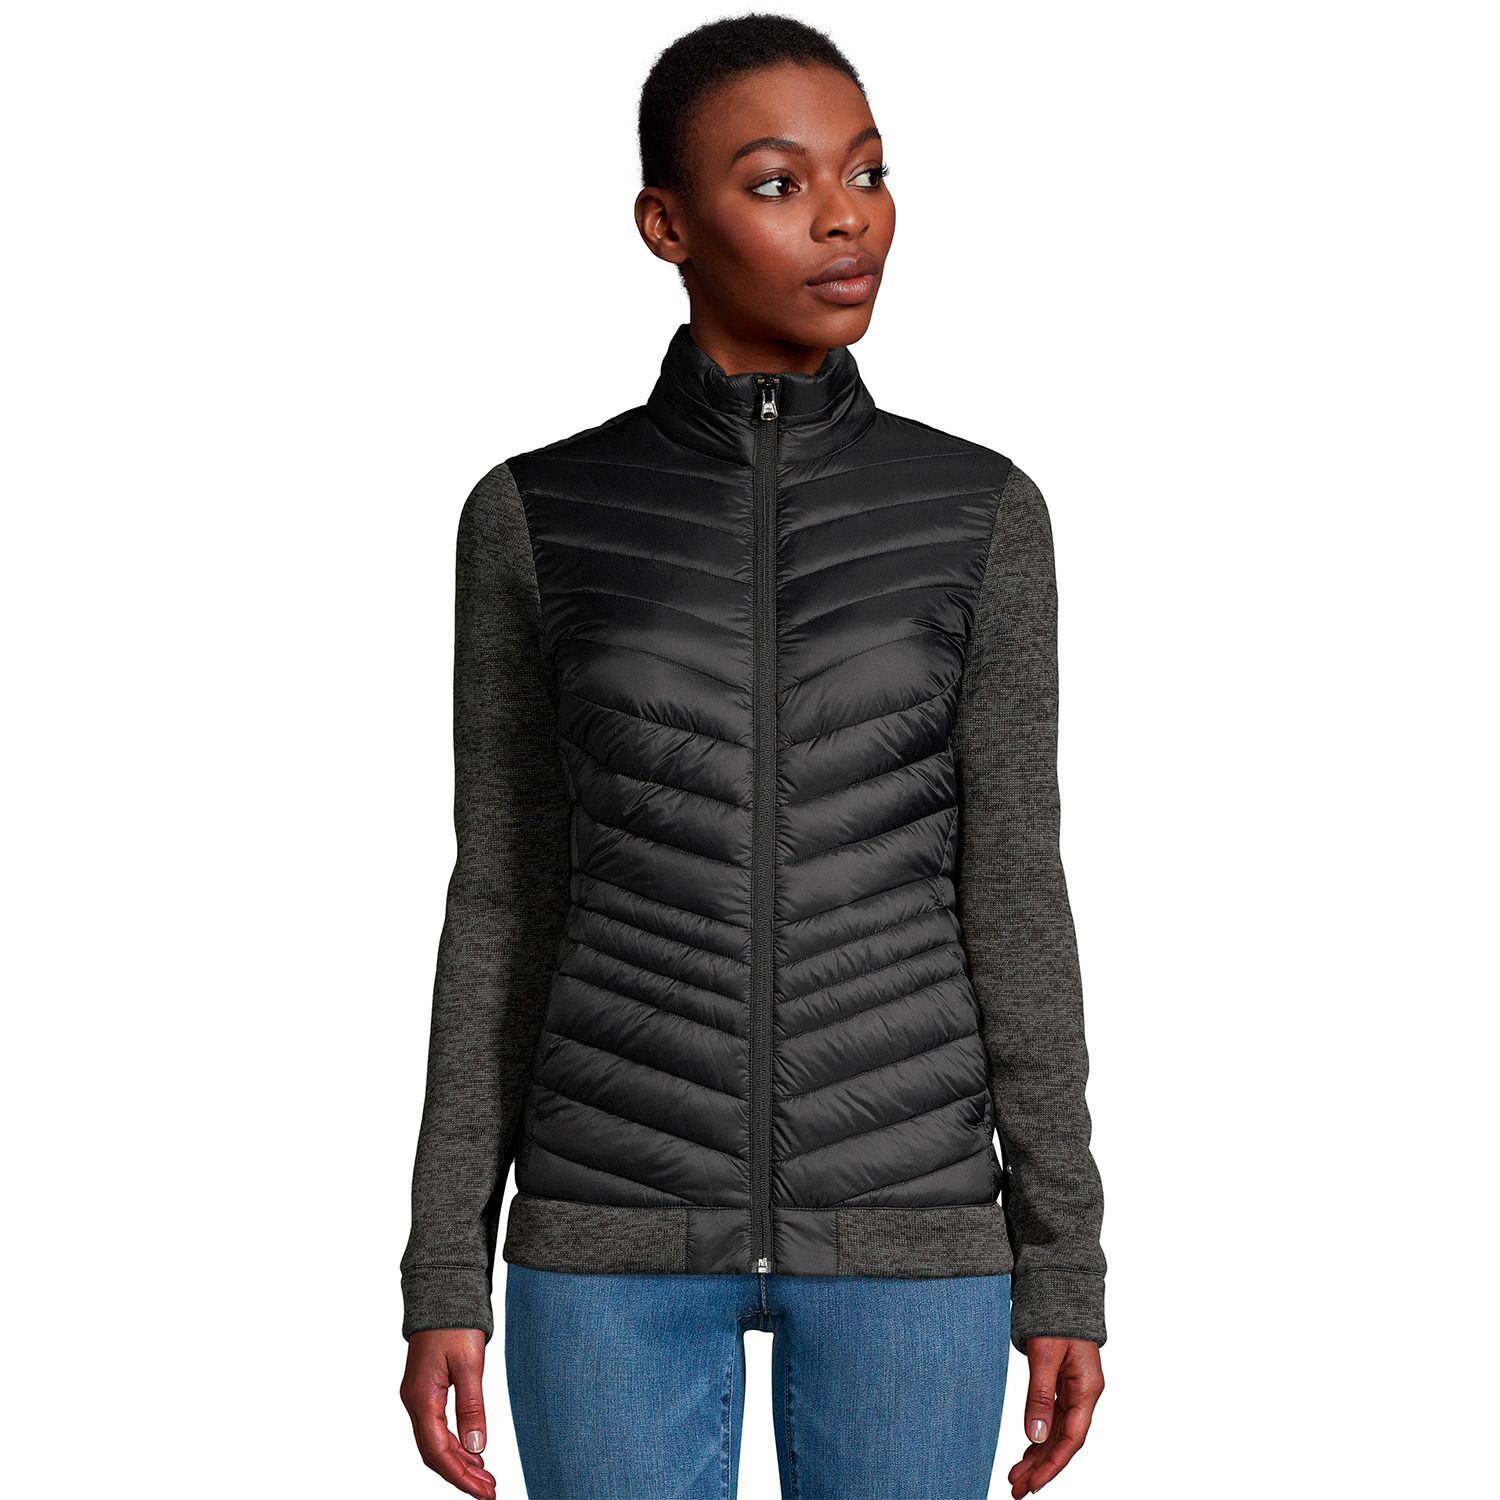 Image for Lands' End Petite Down Ultralight Packable Sweater Fleece Jacket at Kohl's.